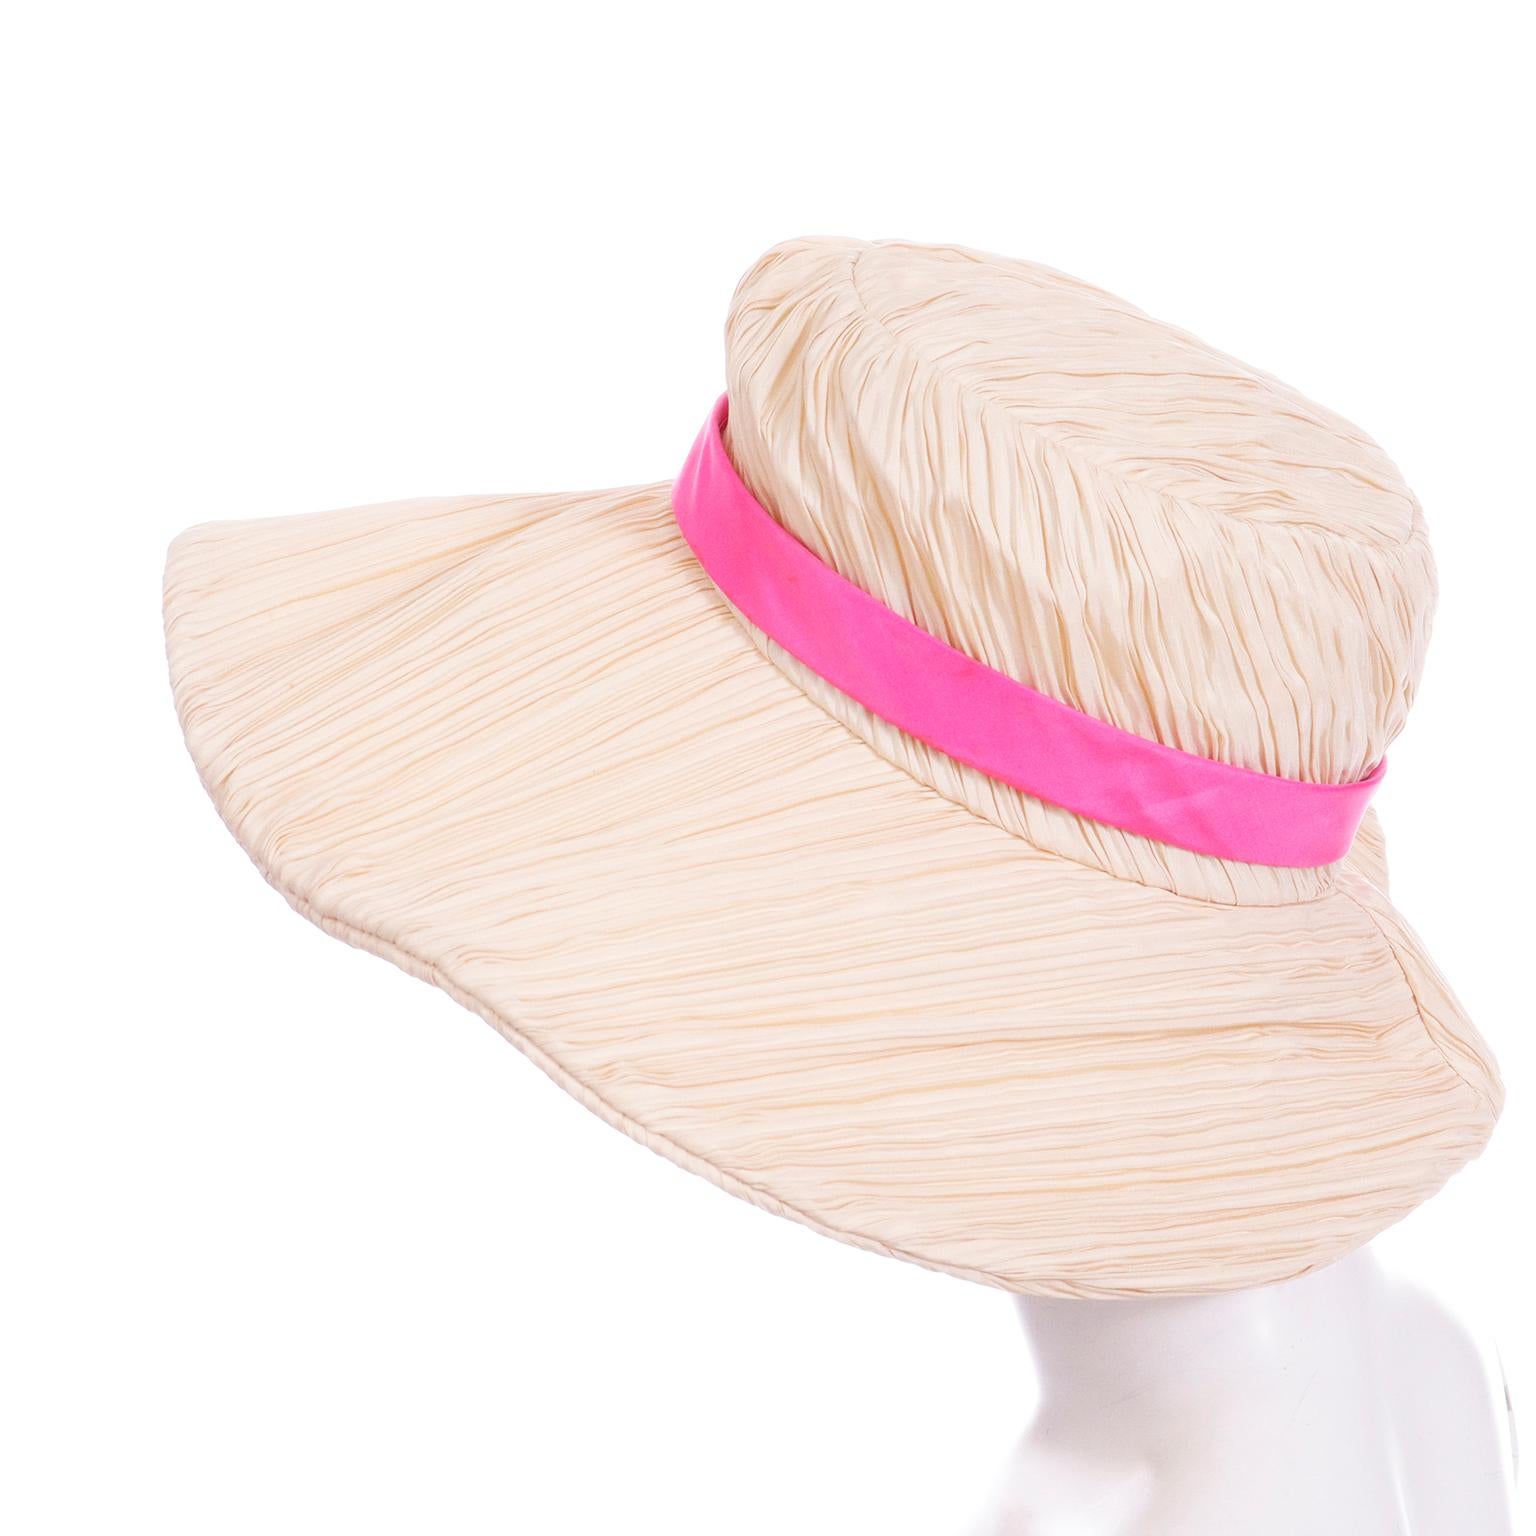 White Mr John Vintage Pleated Cream Floppy Hat With Hot Pink Silk Band Ribbon For Sale